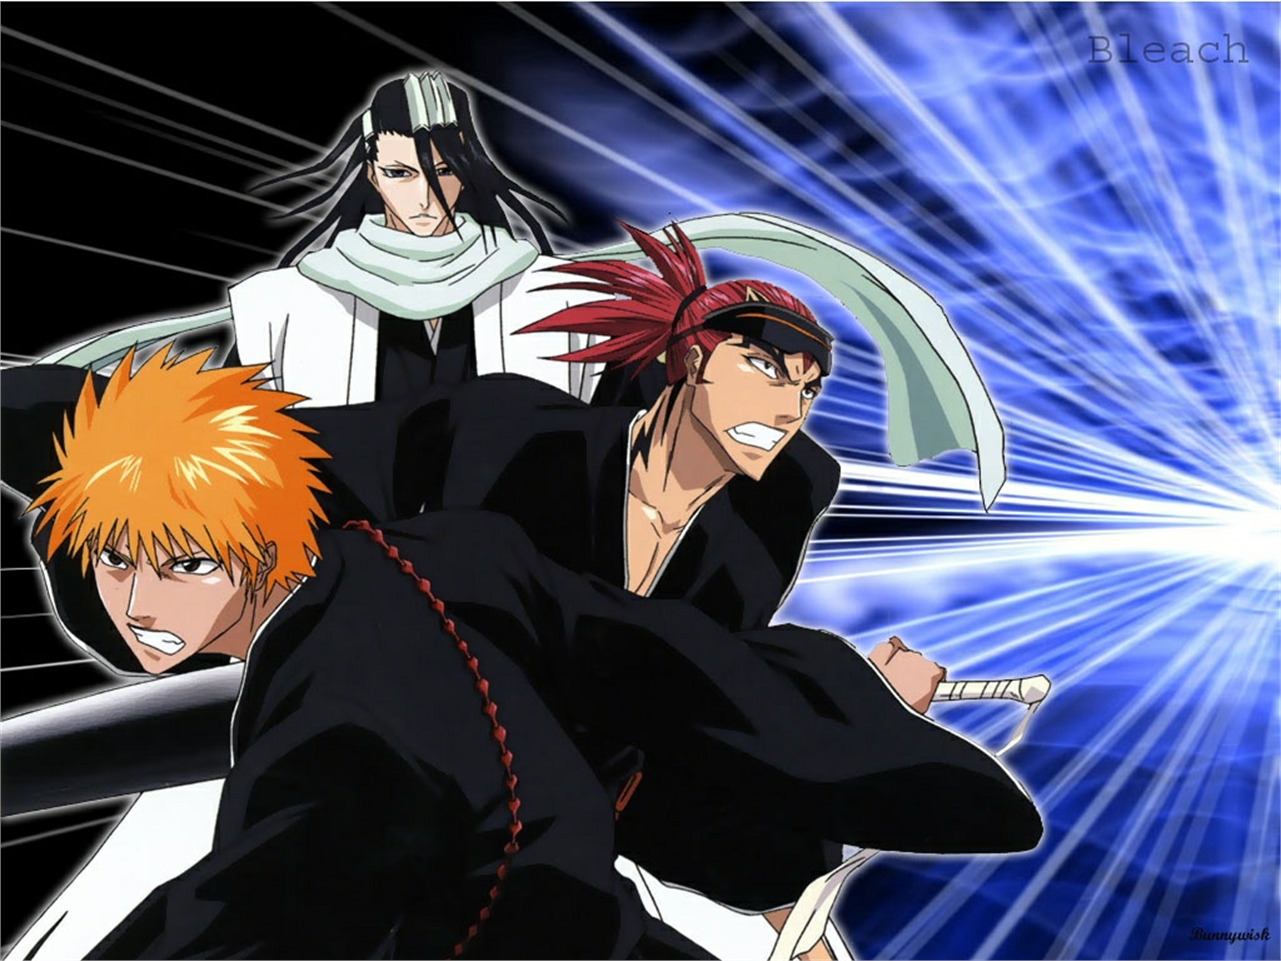 Honestly, what do you think about Renji's new Bankai design ? : r/bleach